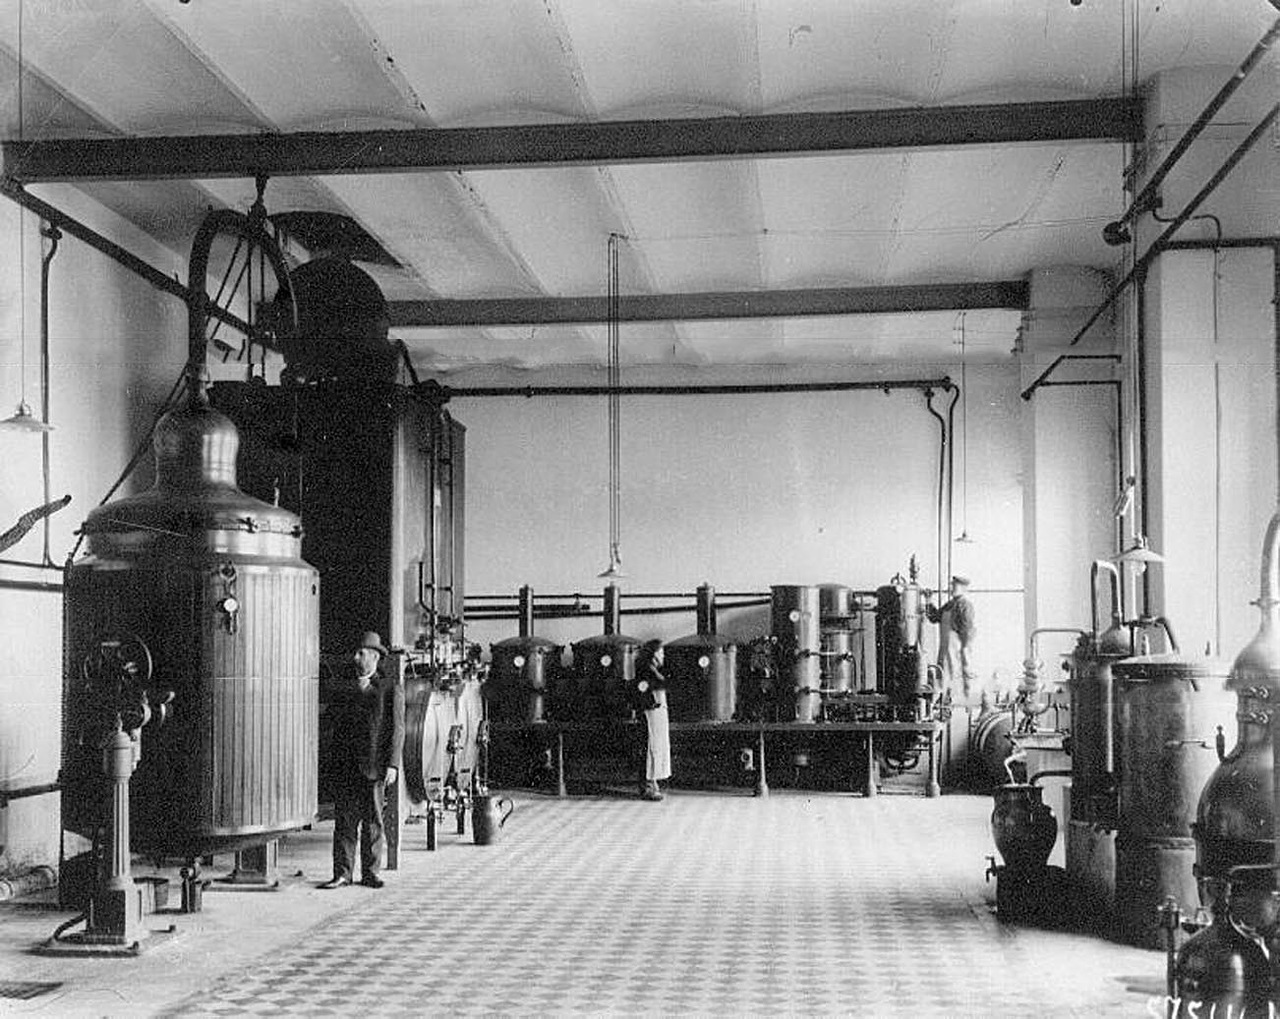 It opened the same year – 1863 – that the state monopoly introduced by Empress Elizabeth in 1751 was laid to rest. While the monopoly and promotion of state-manufactured vodka had made the drink popular, commercial liberalization caused the prices to drop significantly, allowing even low-income citizens to purchase it. // Facilities for the distillation process at Keller & K°.